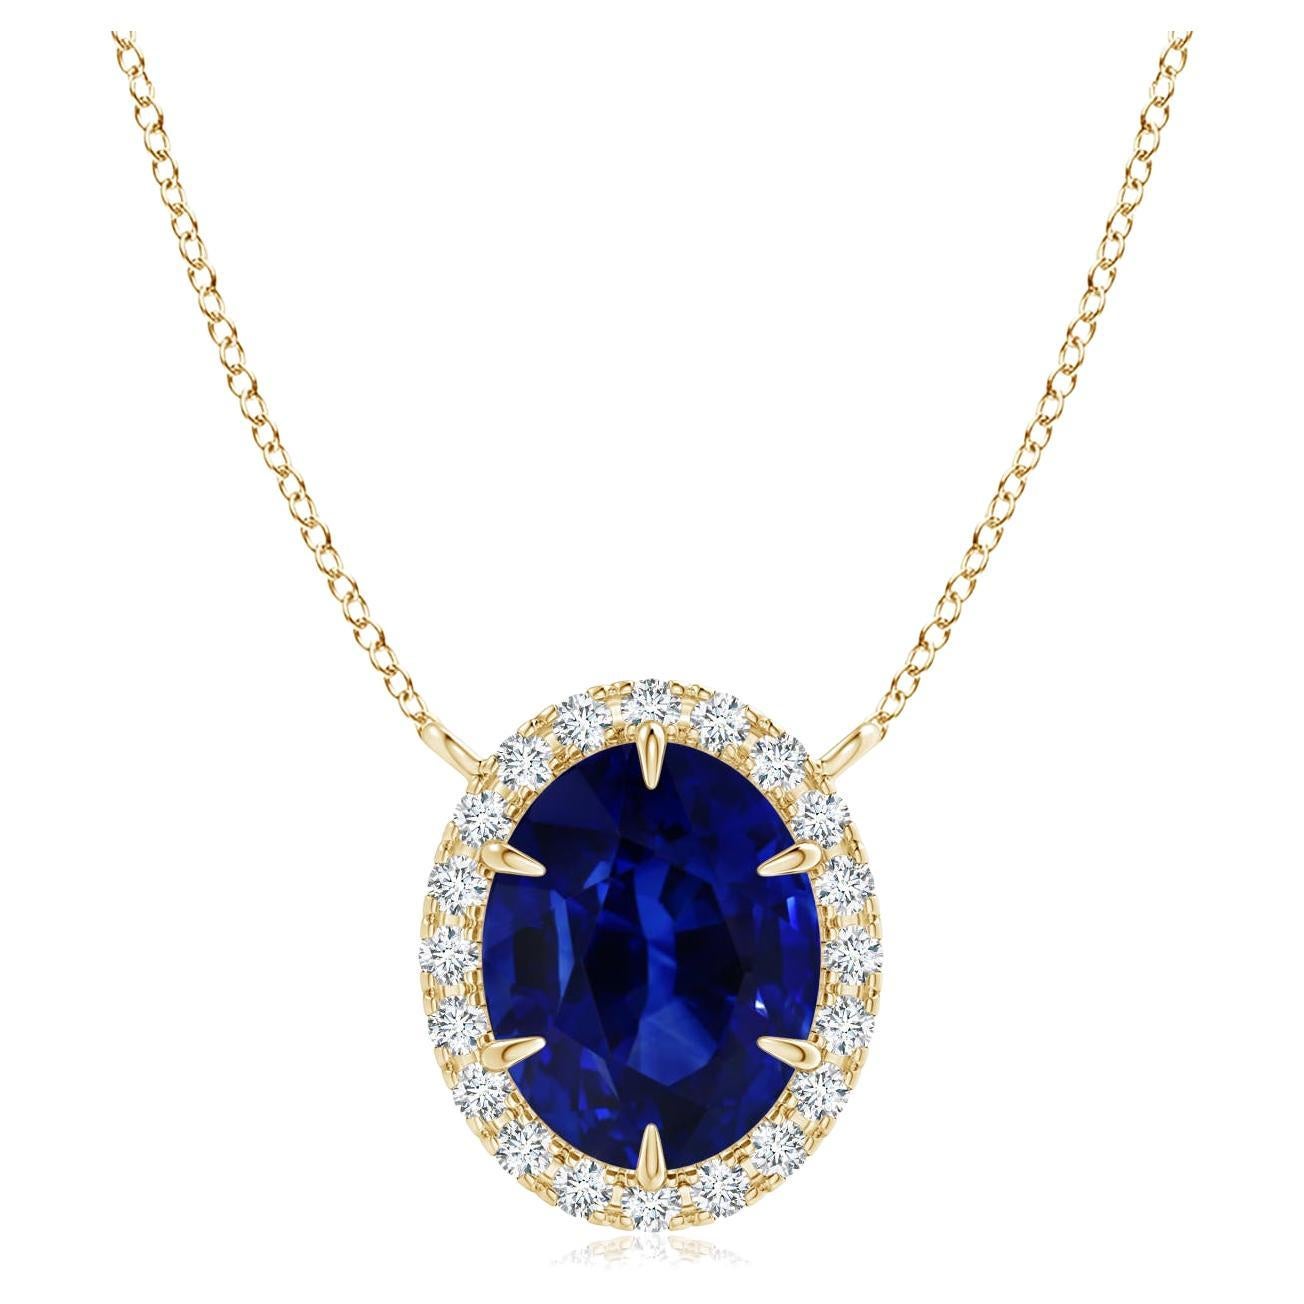 ANGARA GIA Certified Natural Sapphire Ellipse Halo Yellow Gold Pendant Necklace